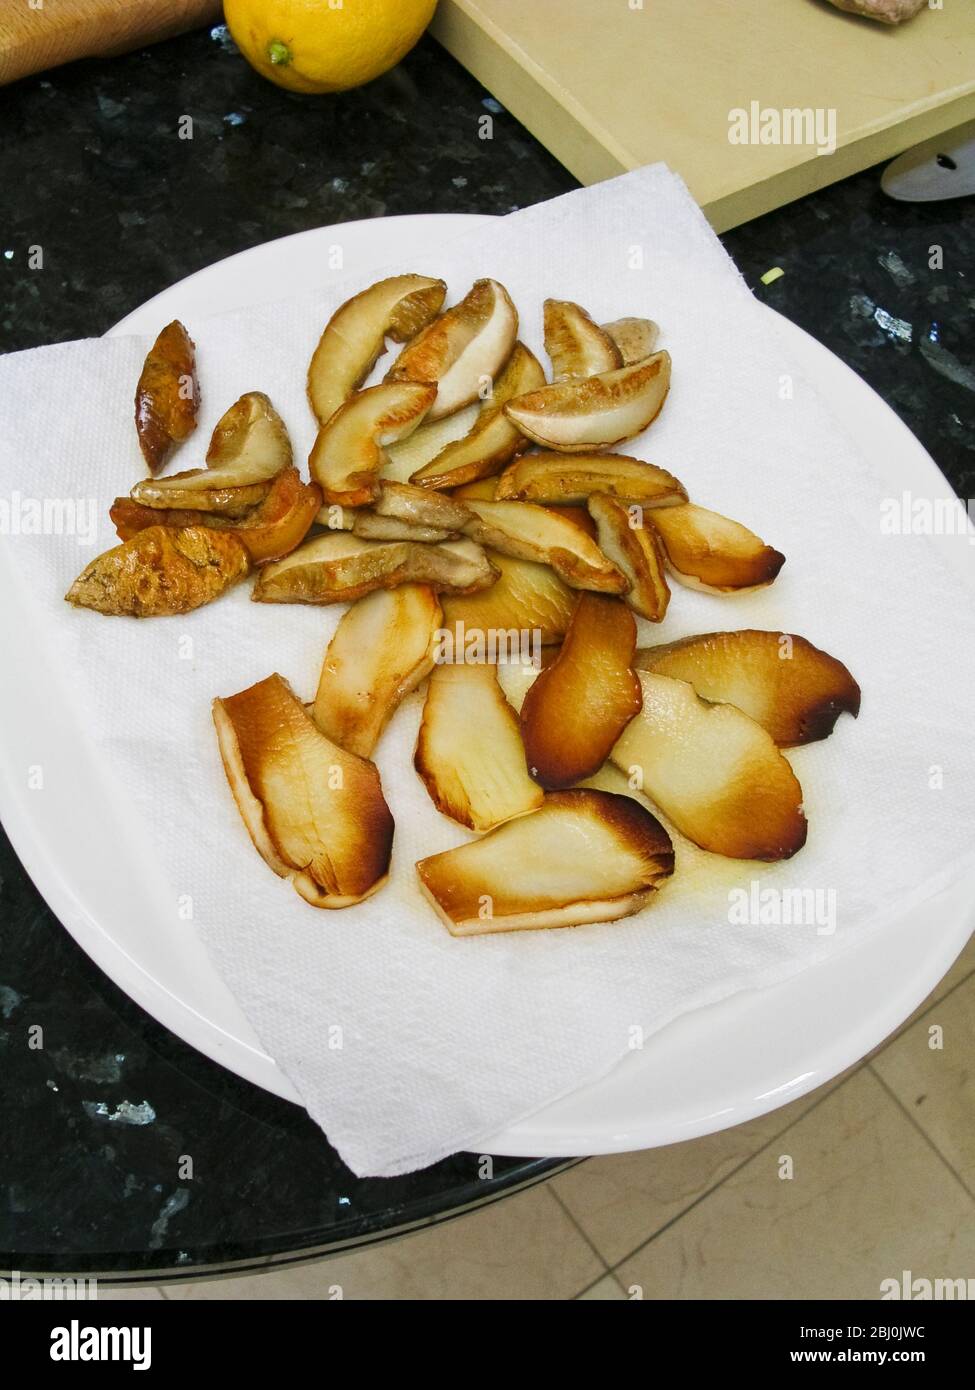 Slices of ceps quickly fried in hot olive oil. - Stock Photo